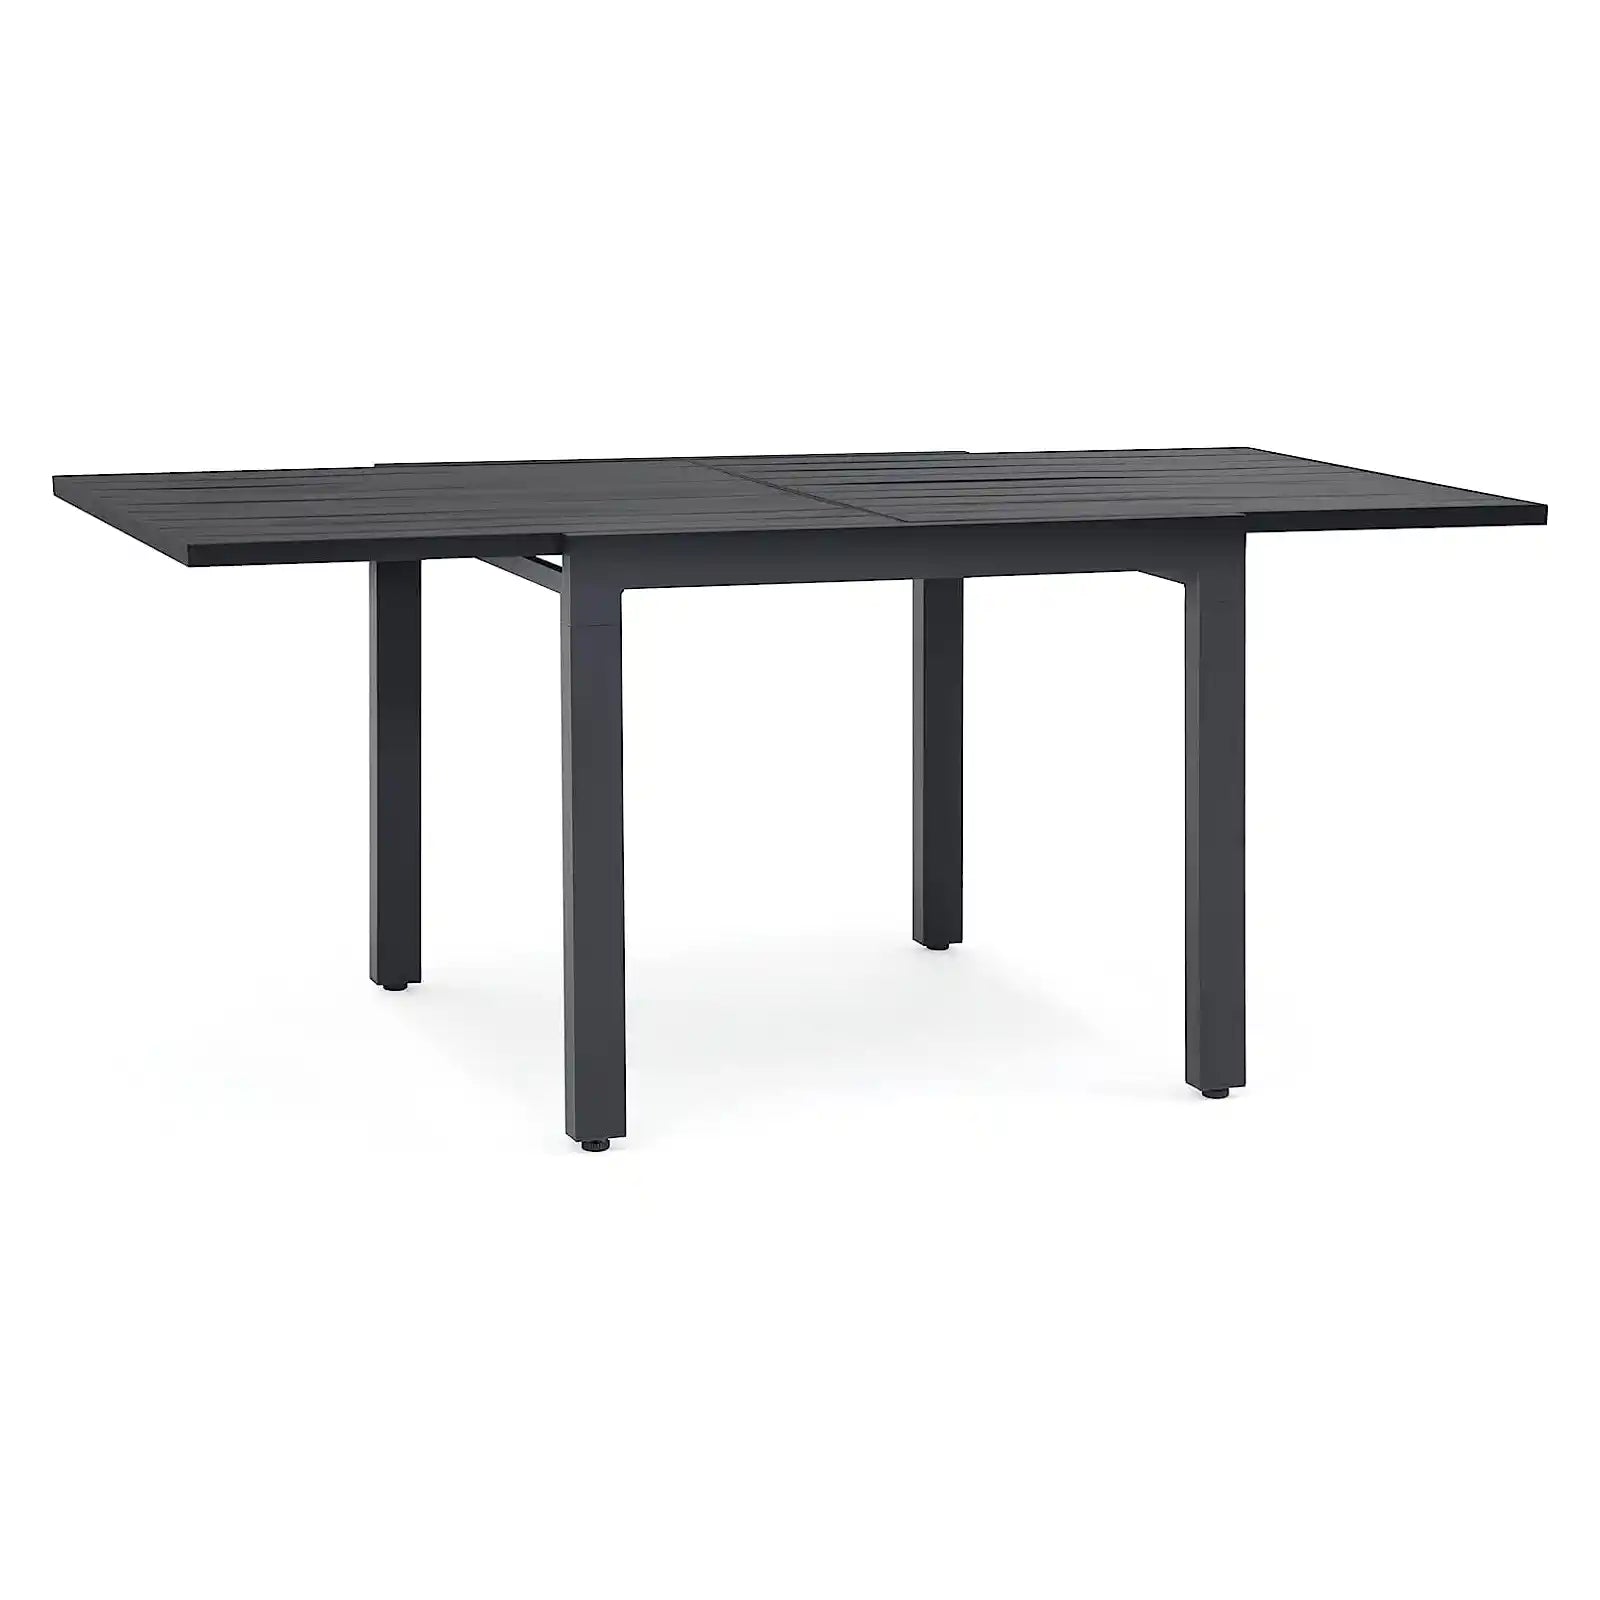 Adjustable Rectangle Table for Outdoor